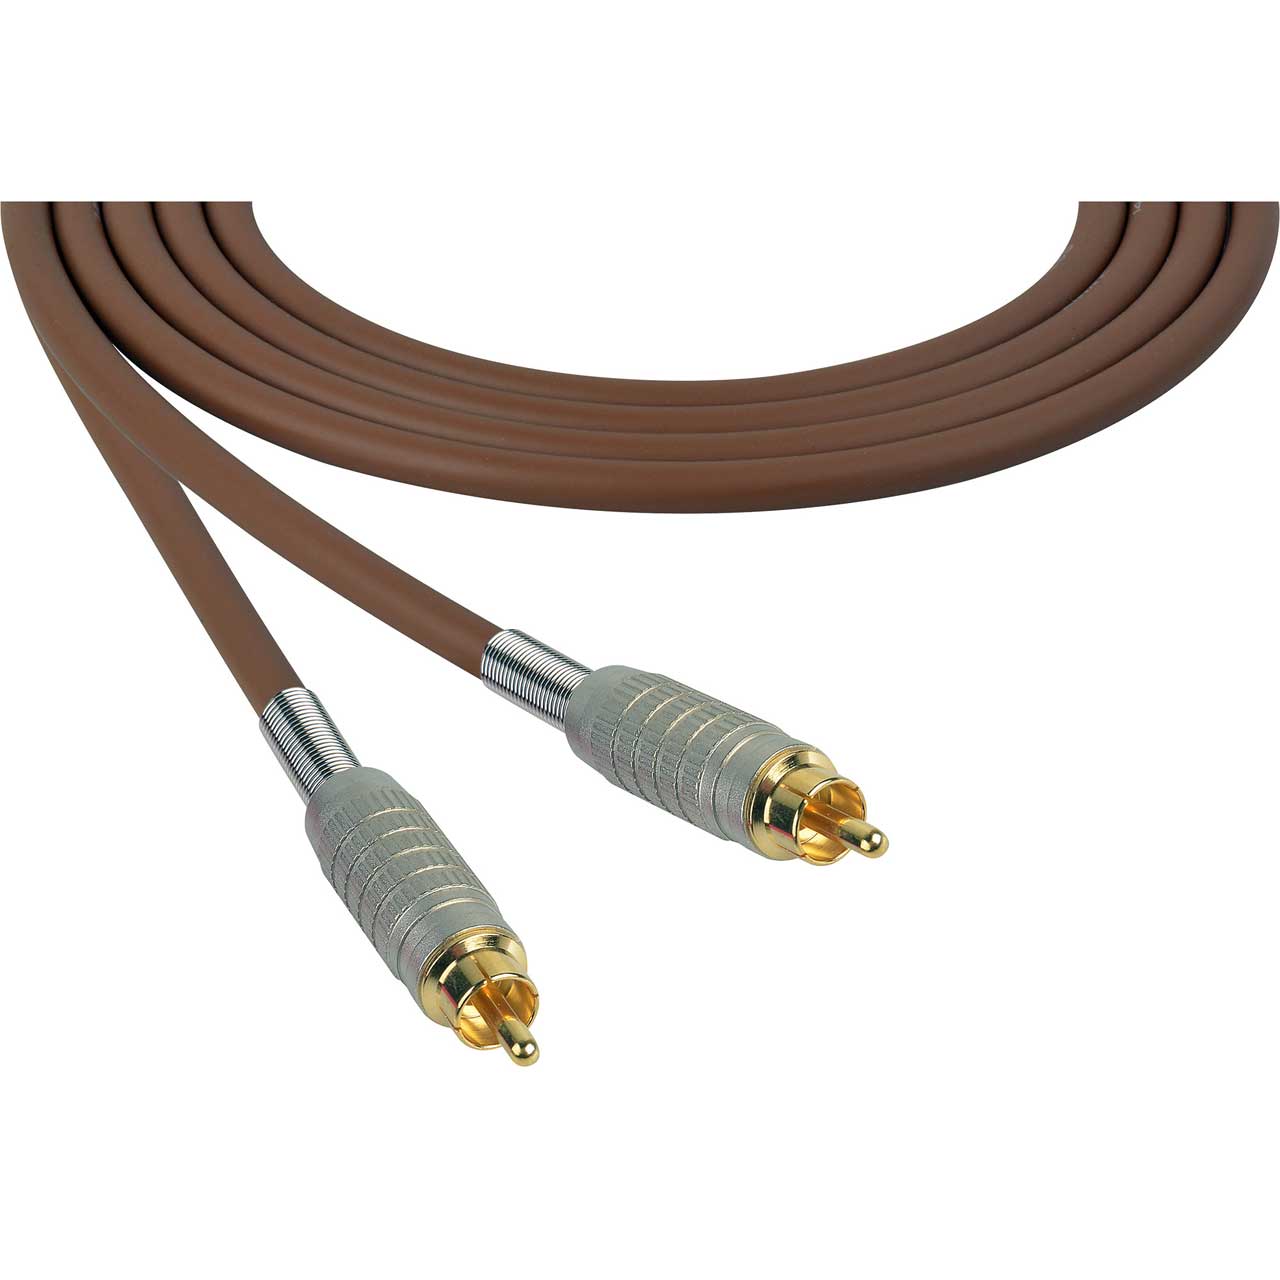 25' FT CANARE HI-FI RCA TO BALANCED XLR MALE INTERCONNECT CABLE. 